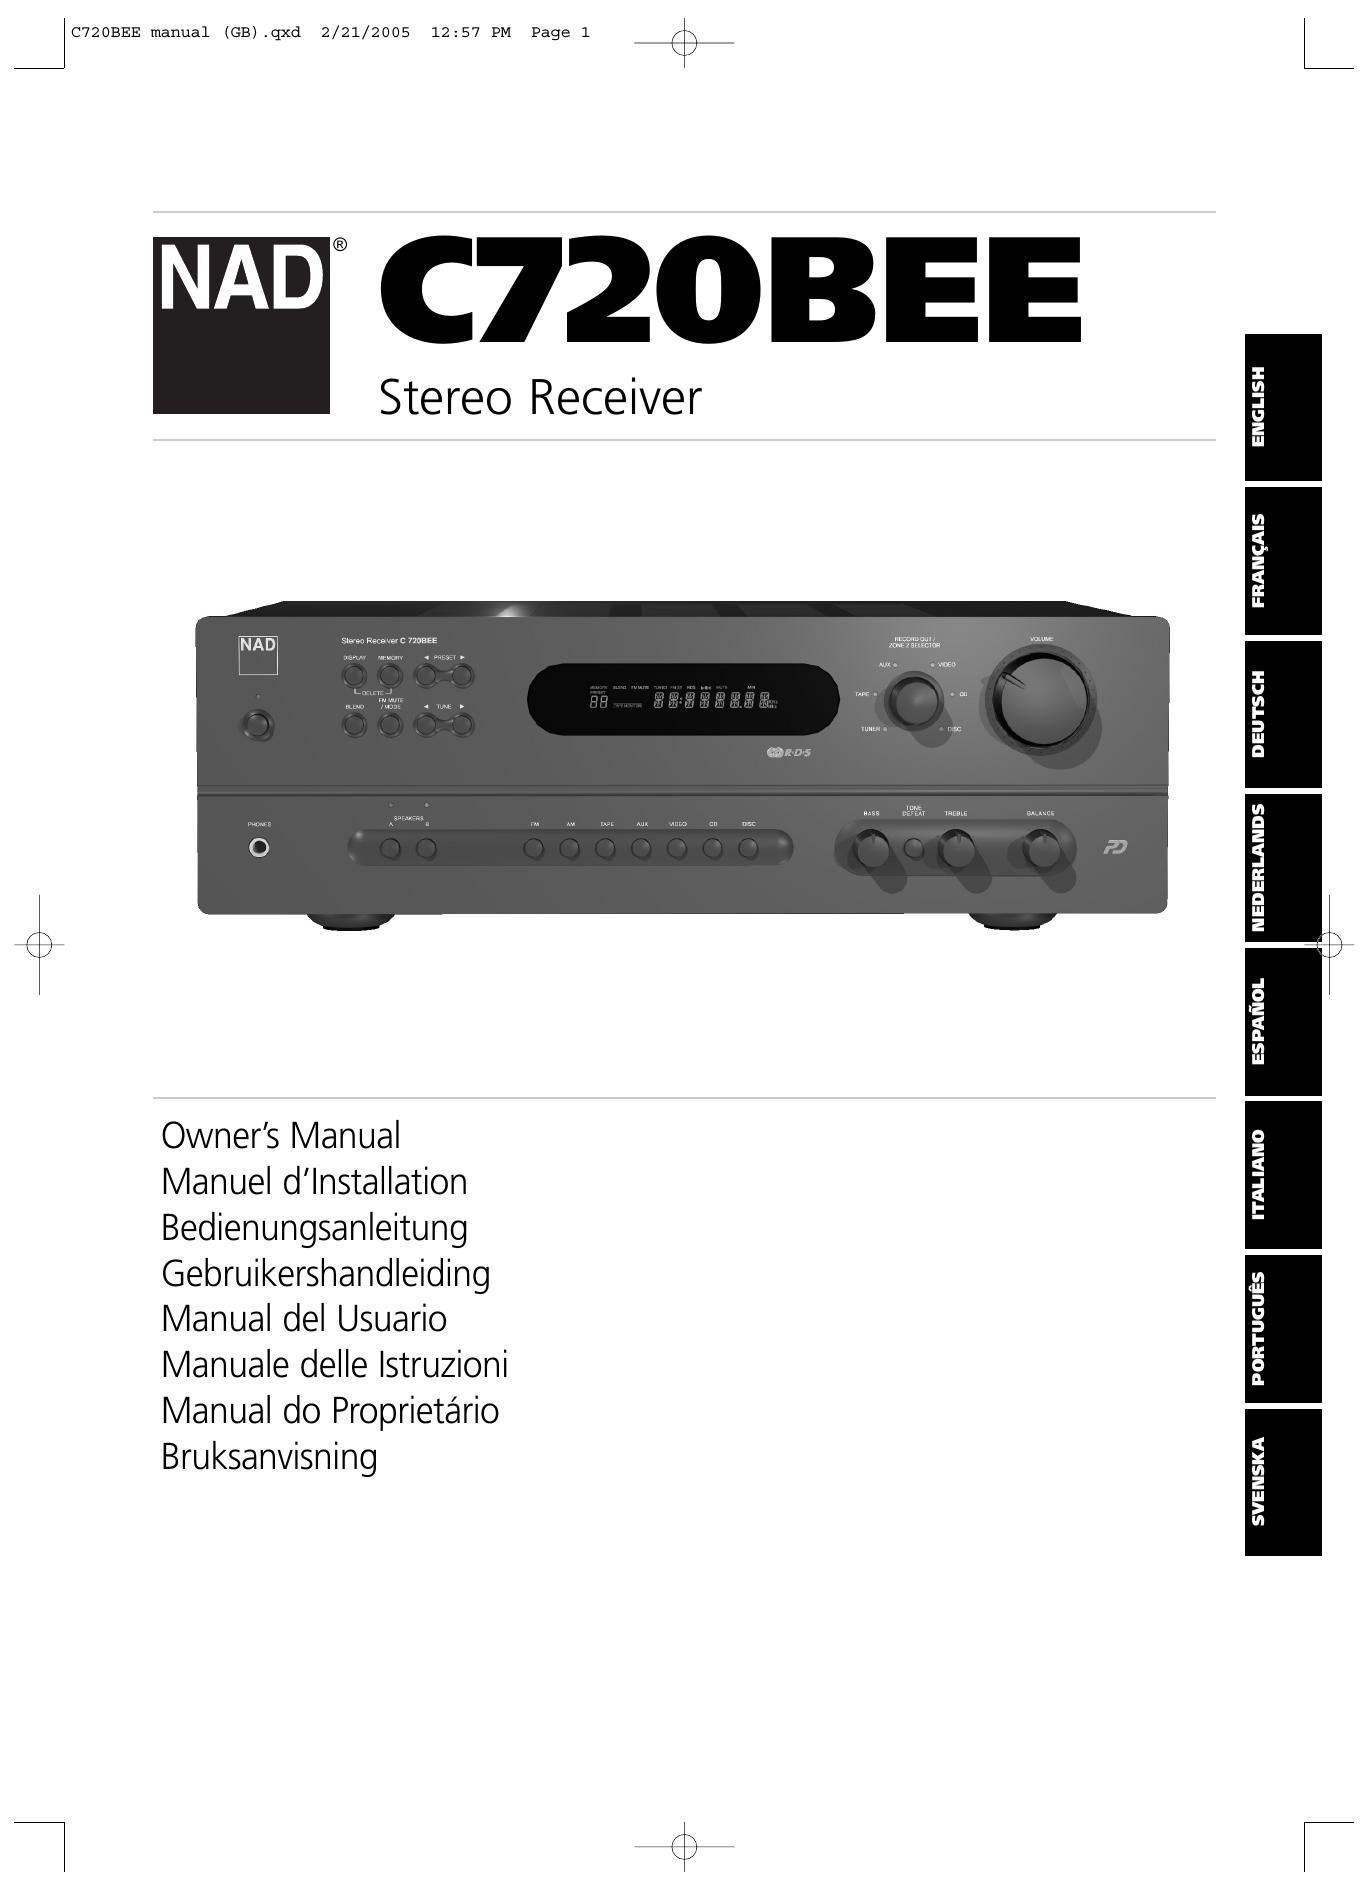 Nad C 720 BEE Owners Manual